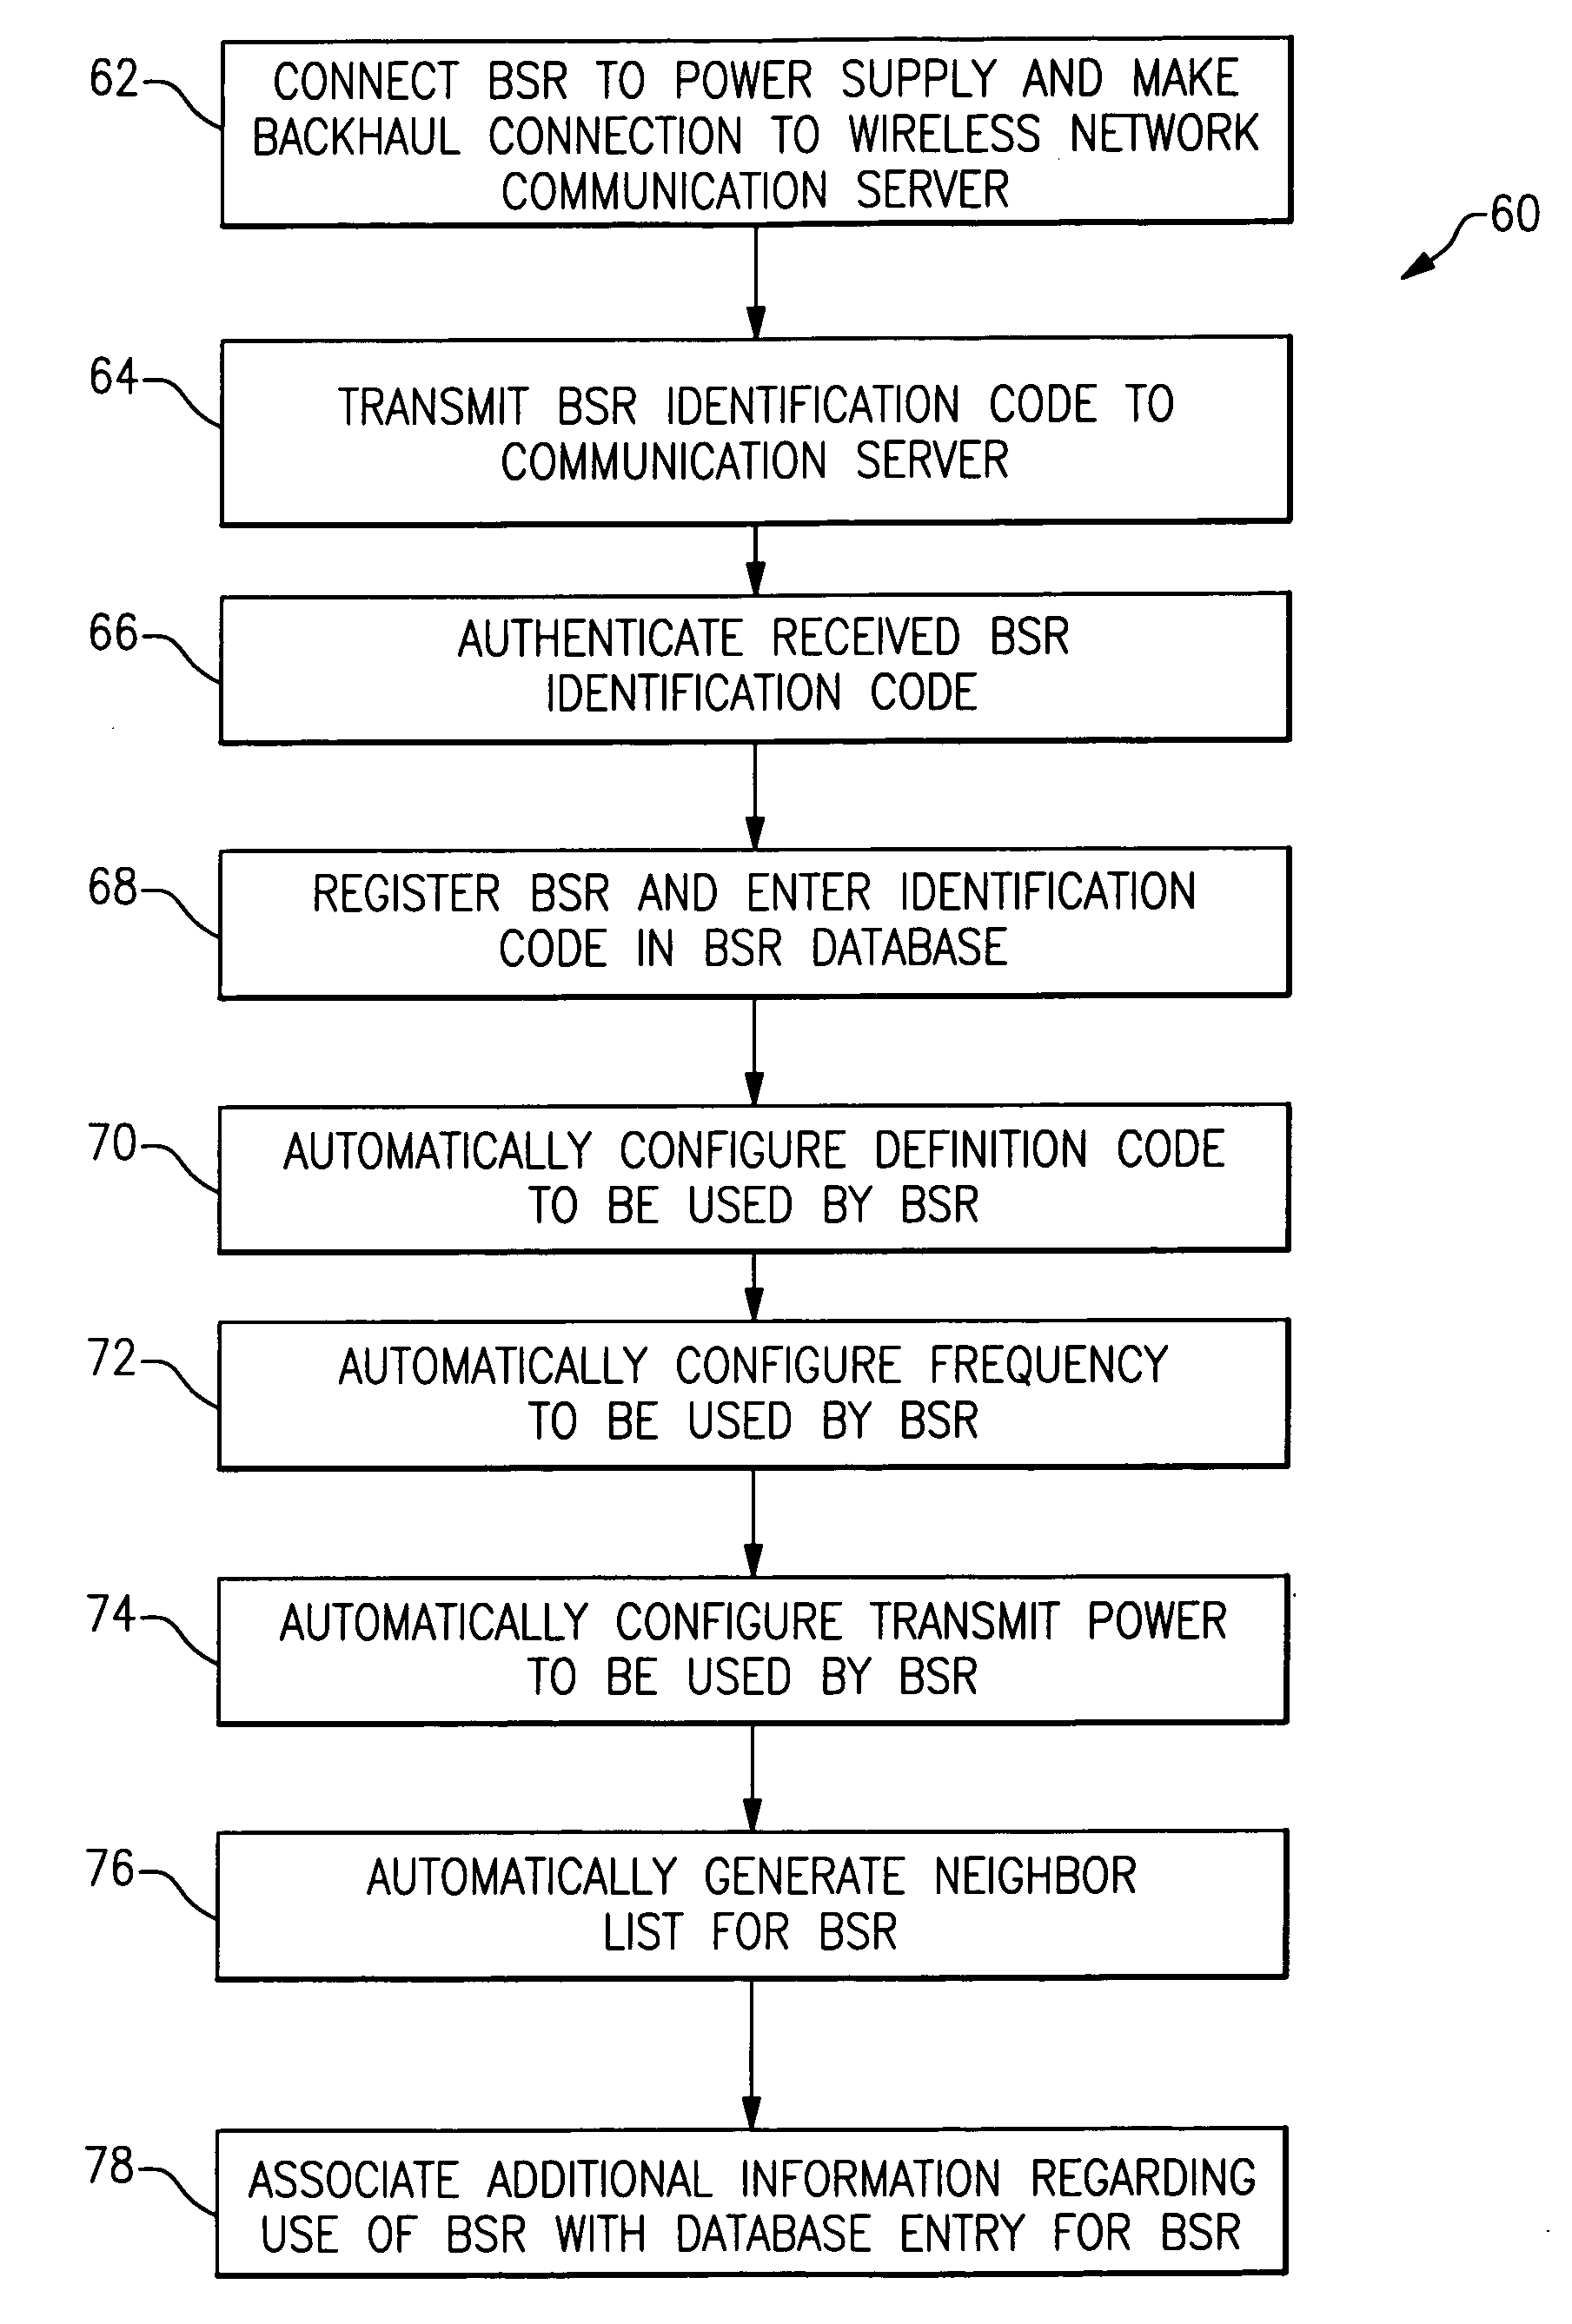 Automated configuration of a base station router device